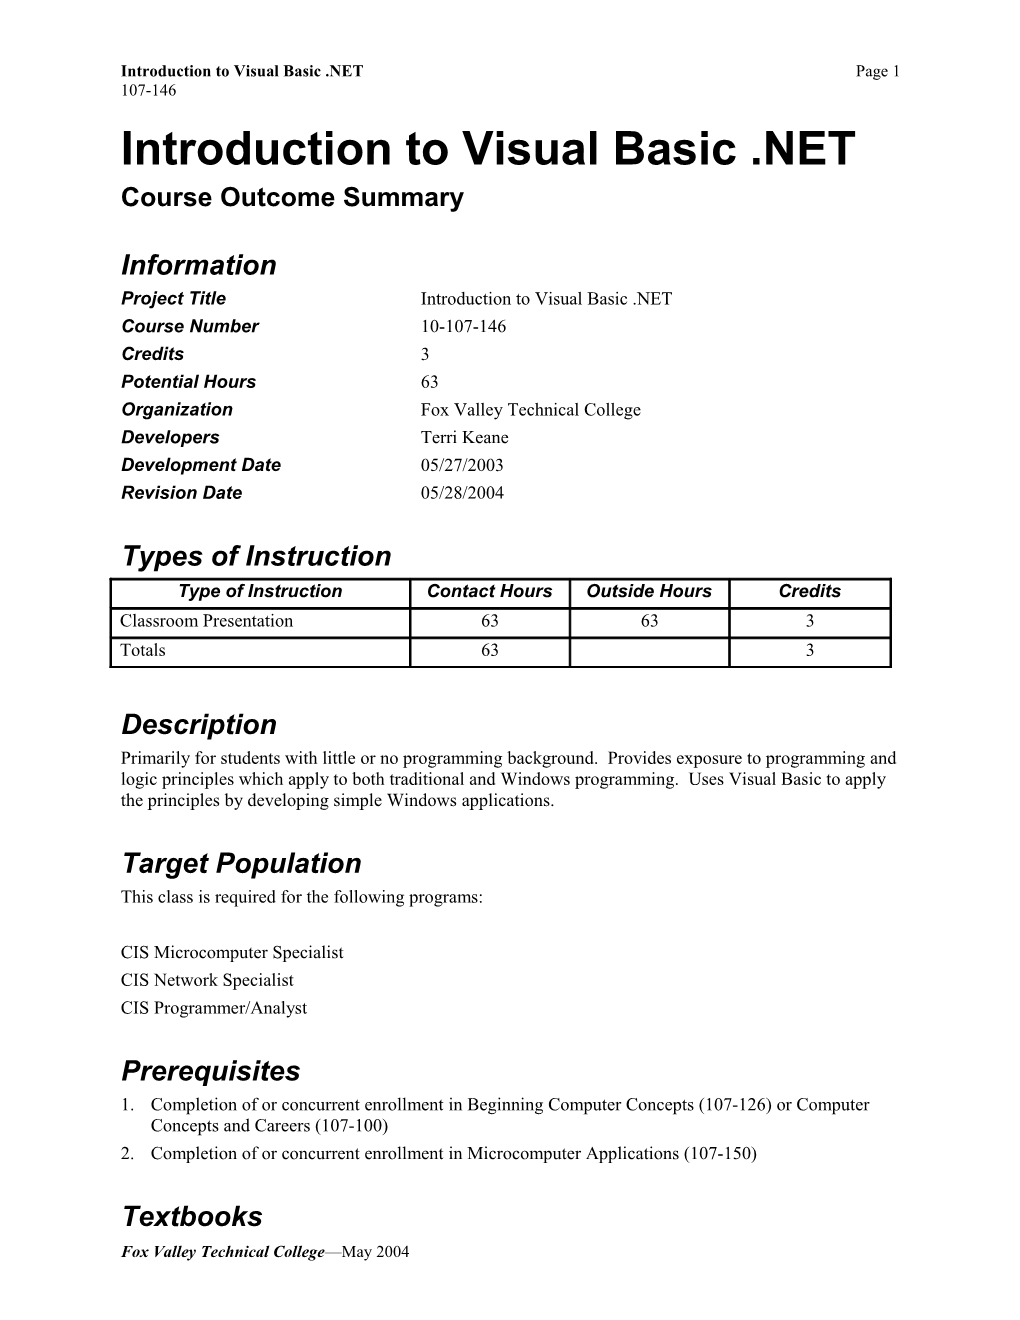 Introduction to Visual Basic